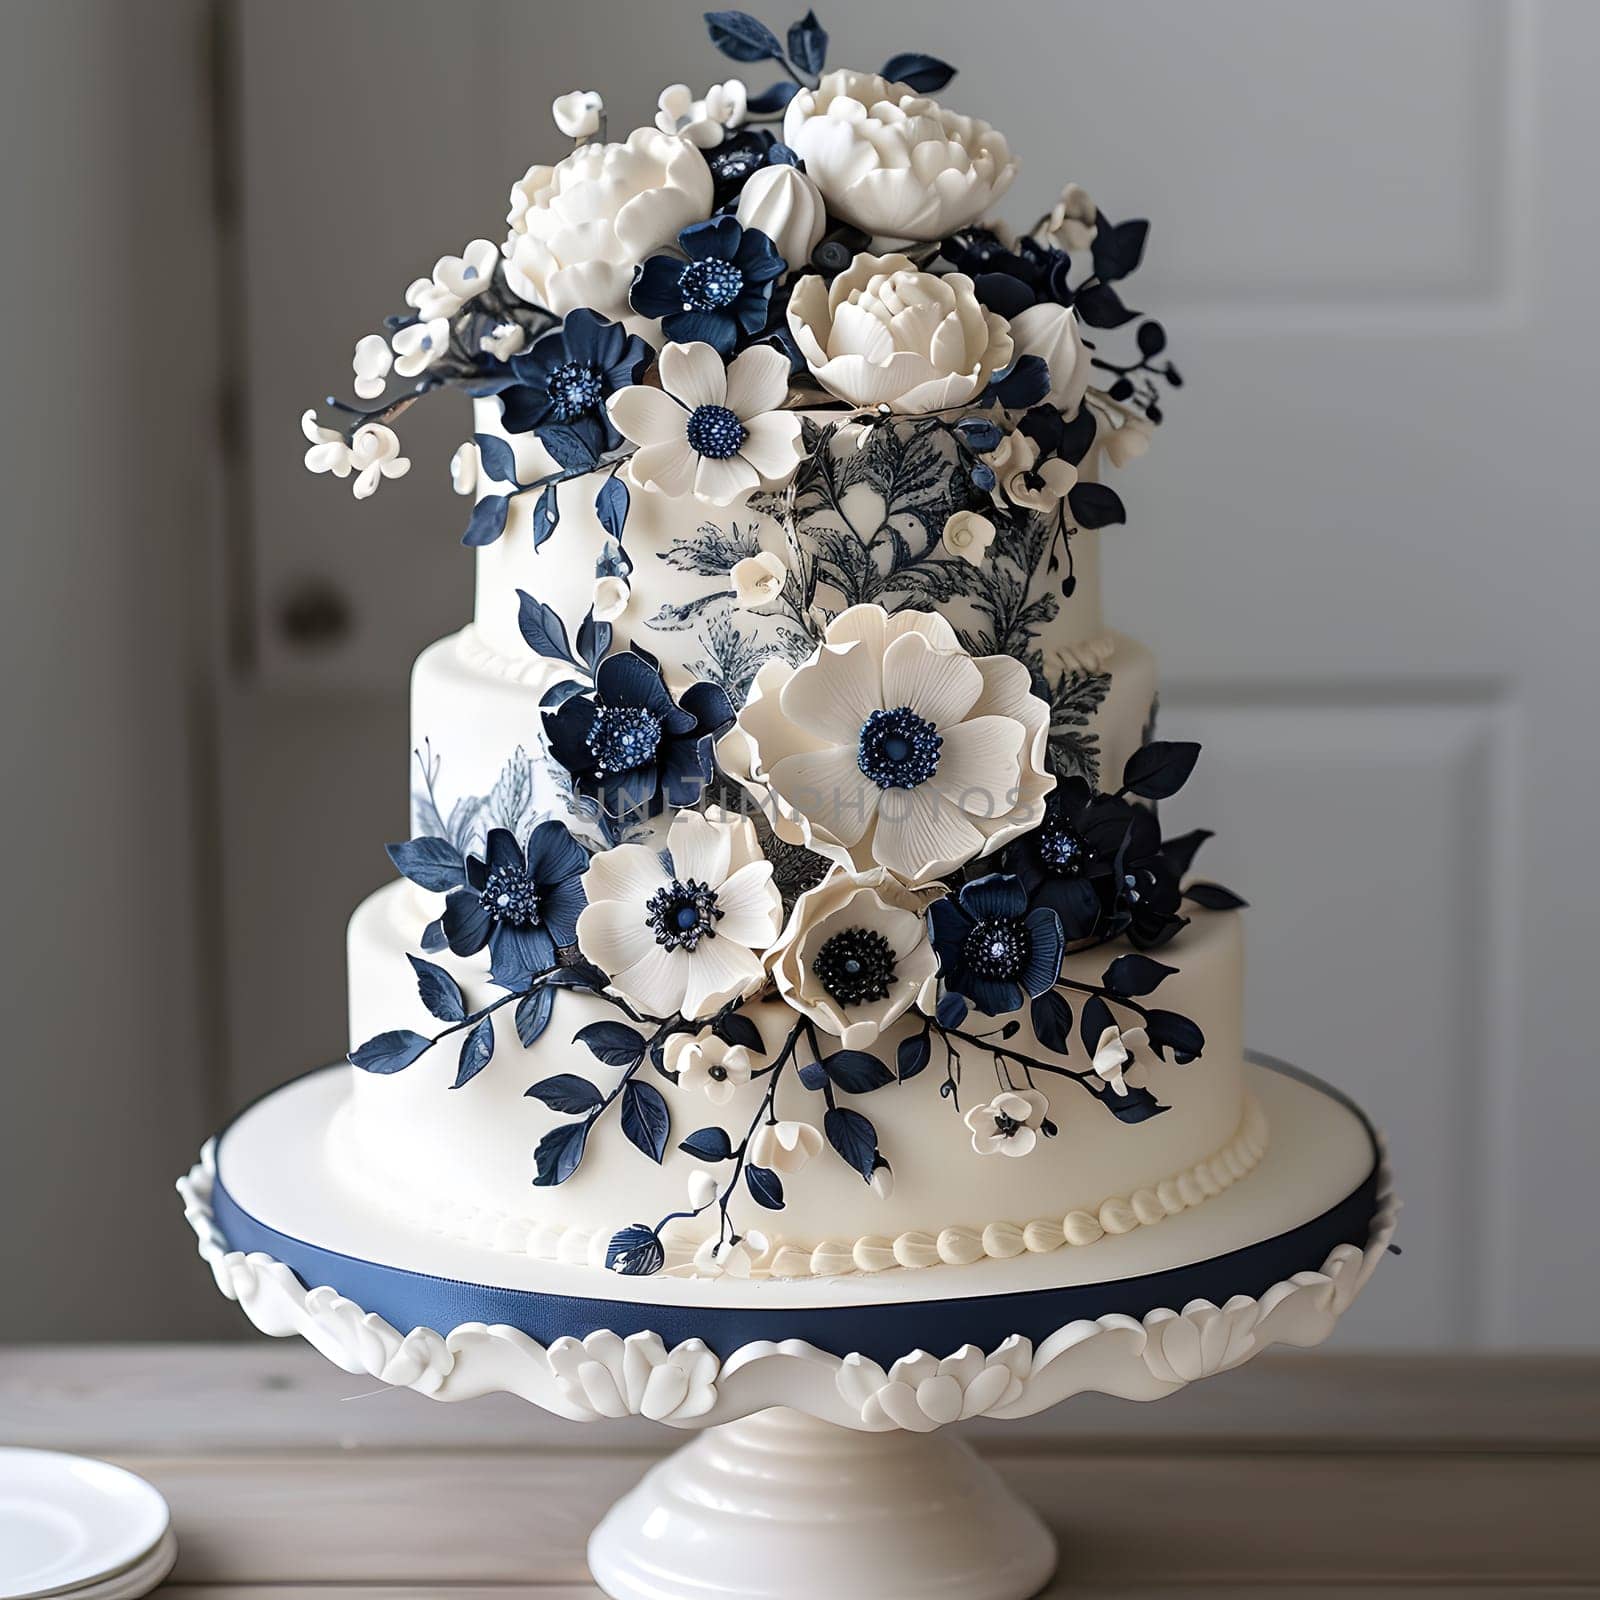 A threetiered wedding cake adorned with blue and white flowers displayed on a cake stand, creating a beautiful centerpiece for the reception